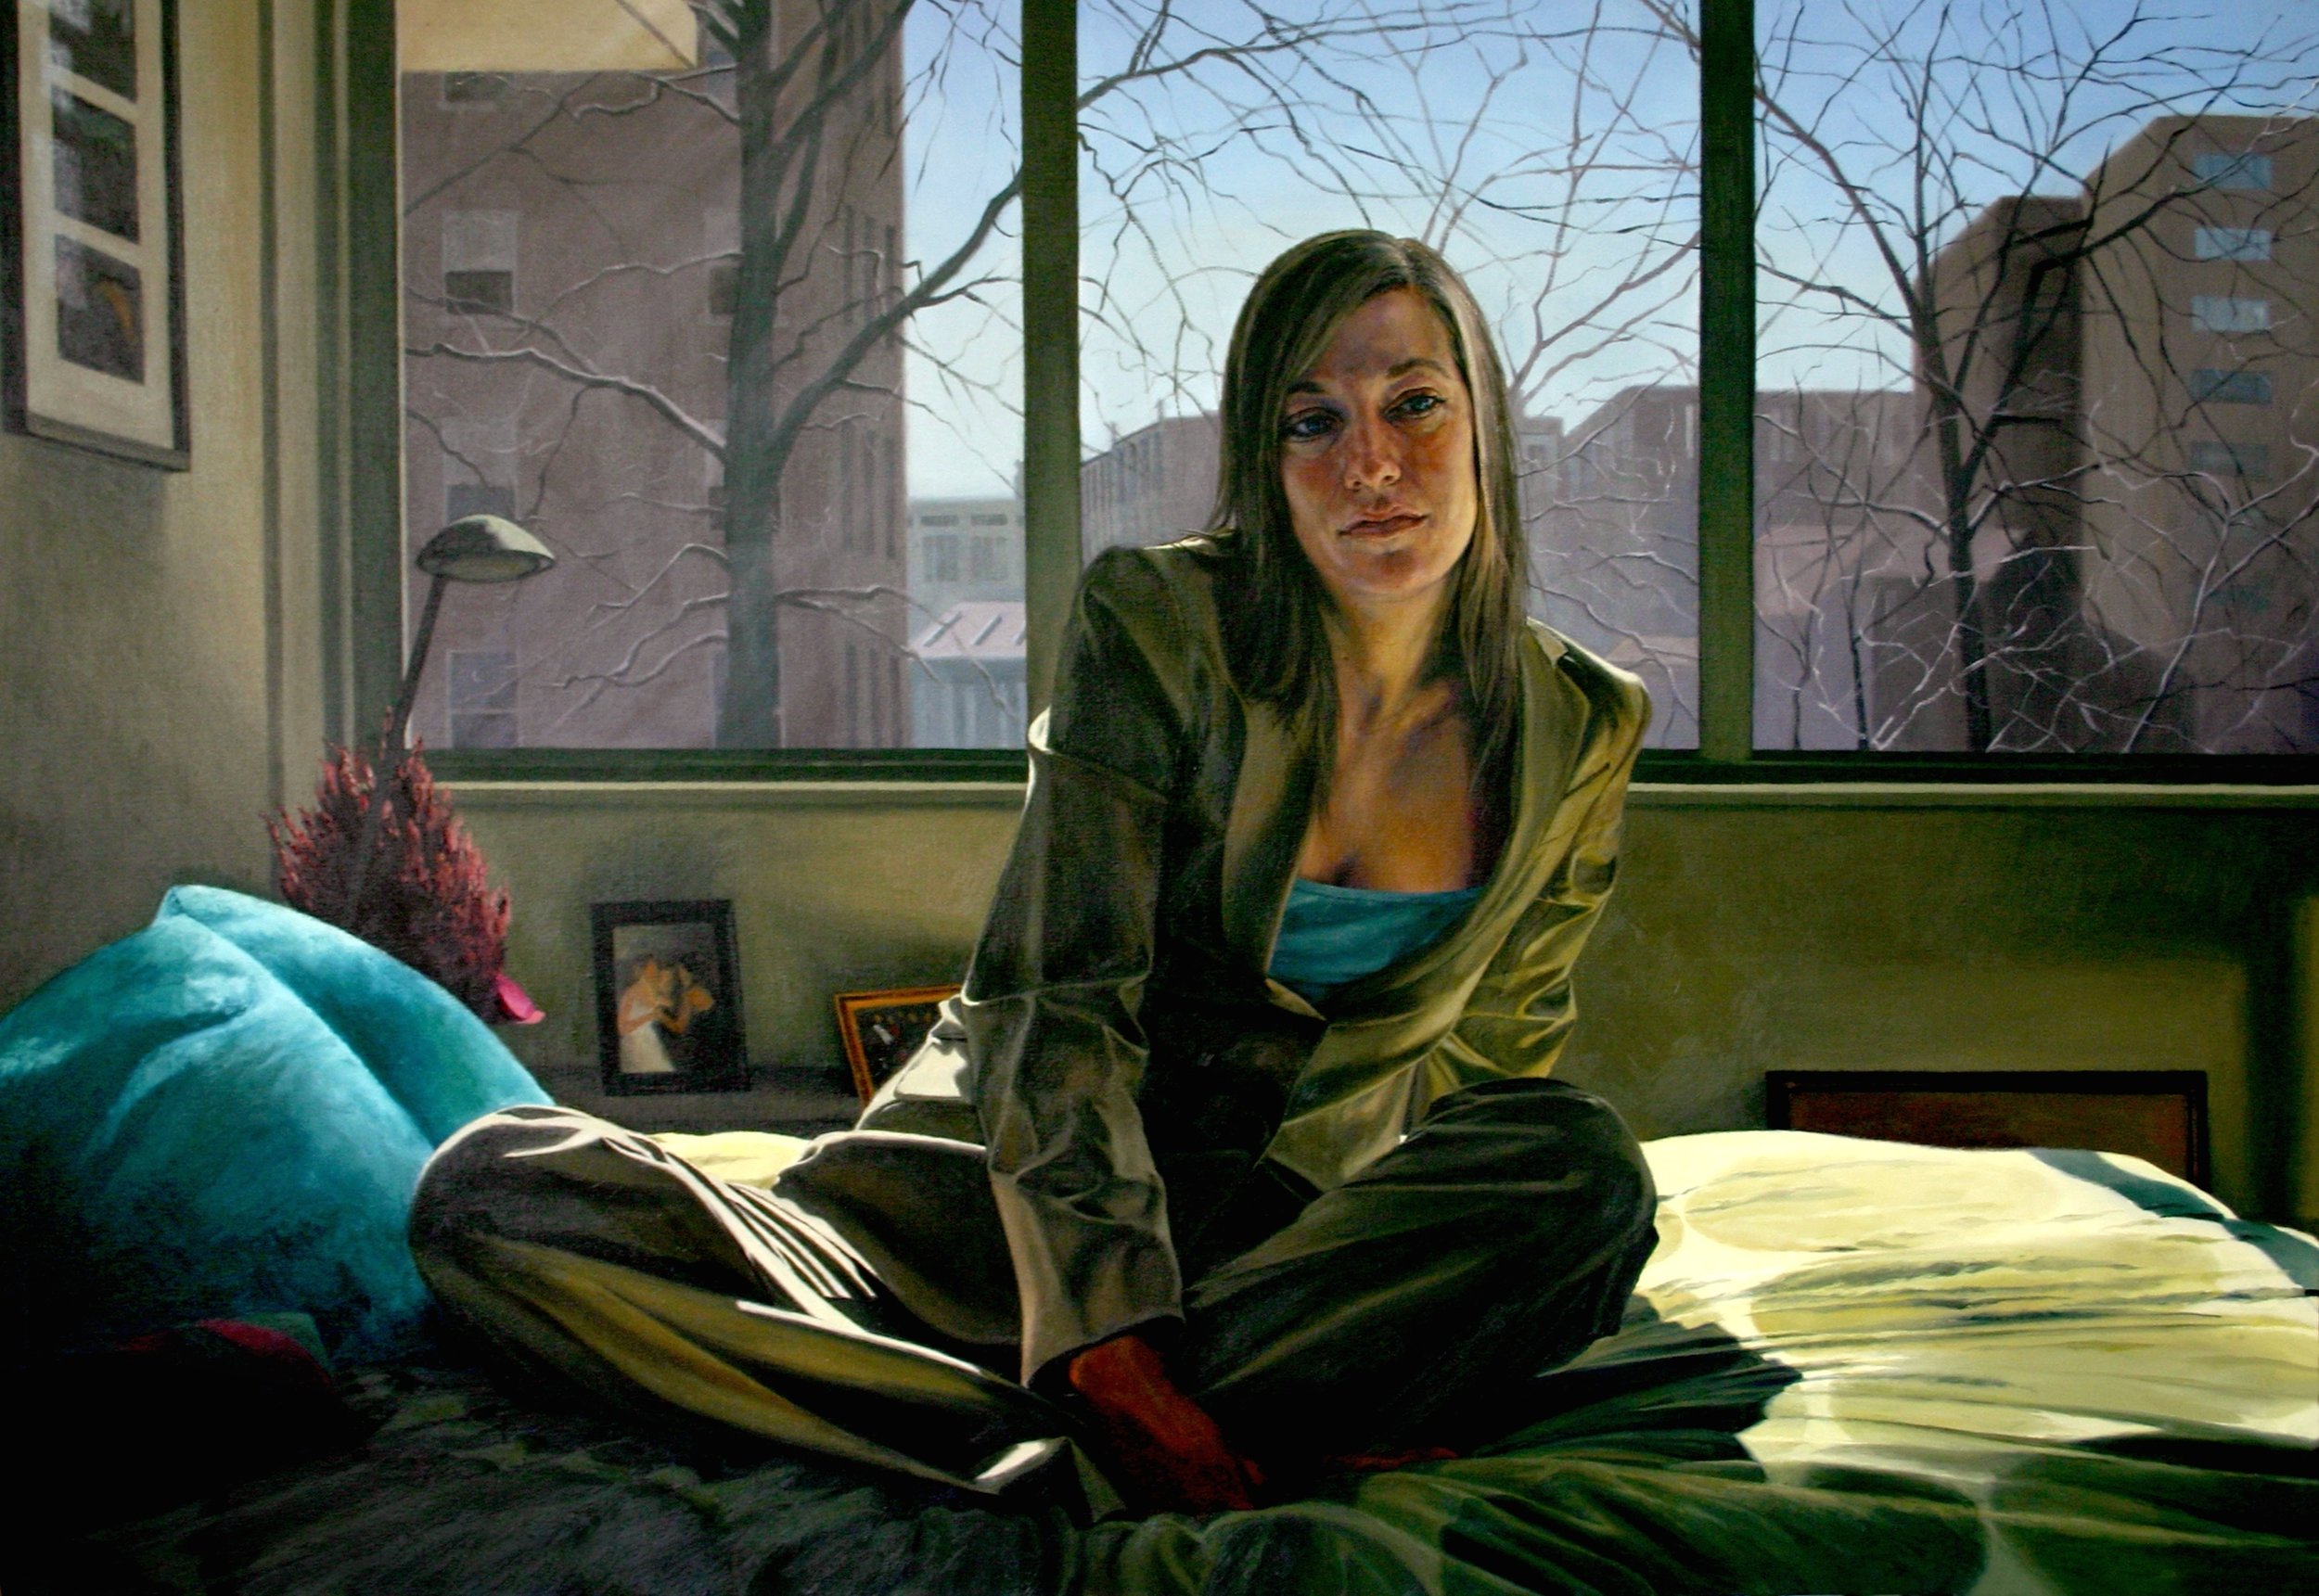   Grace at Home , Oil on Canvas, 2005, 40" x 58" 